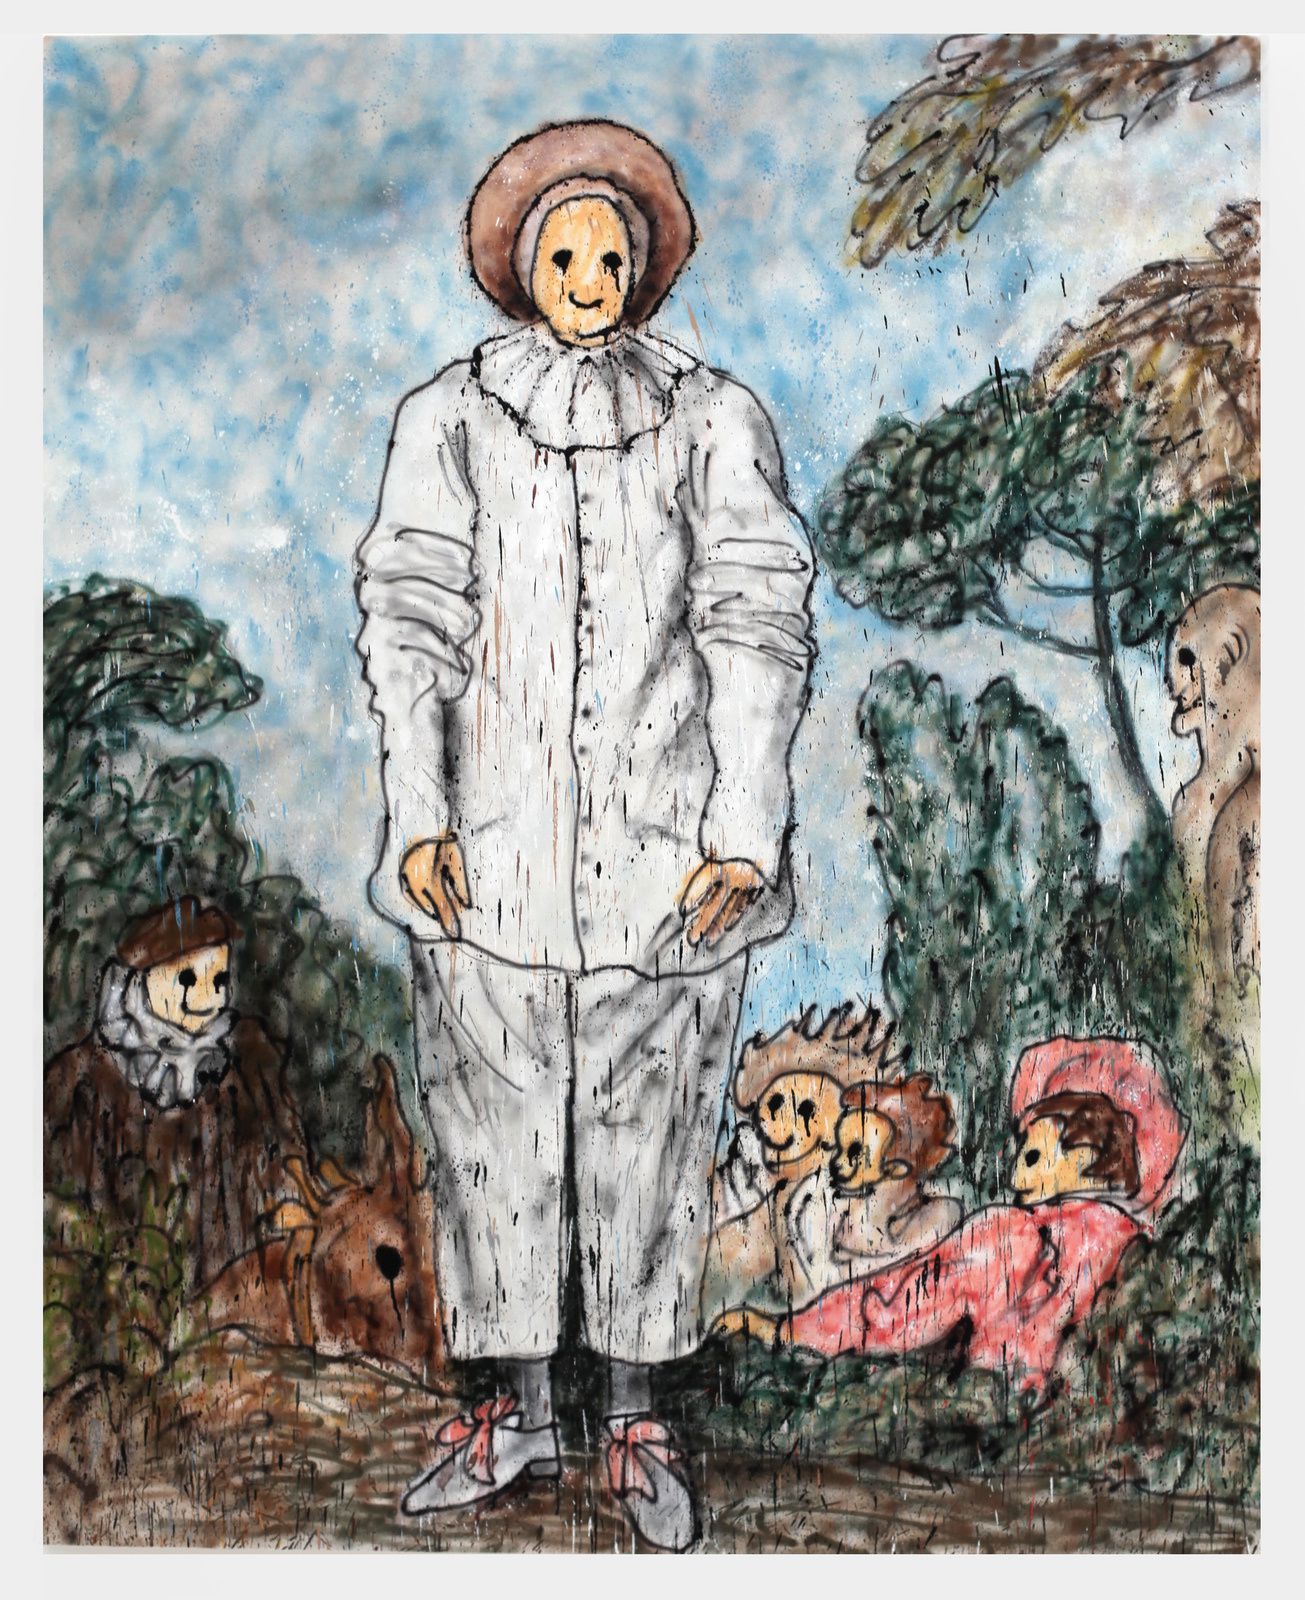 "Pierrot, Fformerly know as Gilles II (Inspired by Jean Antoine Watteau)", 2018 de MADSAKI - Courtesy Galerie Perrotin © Photo Éric Simon